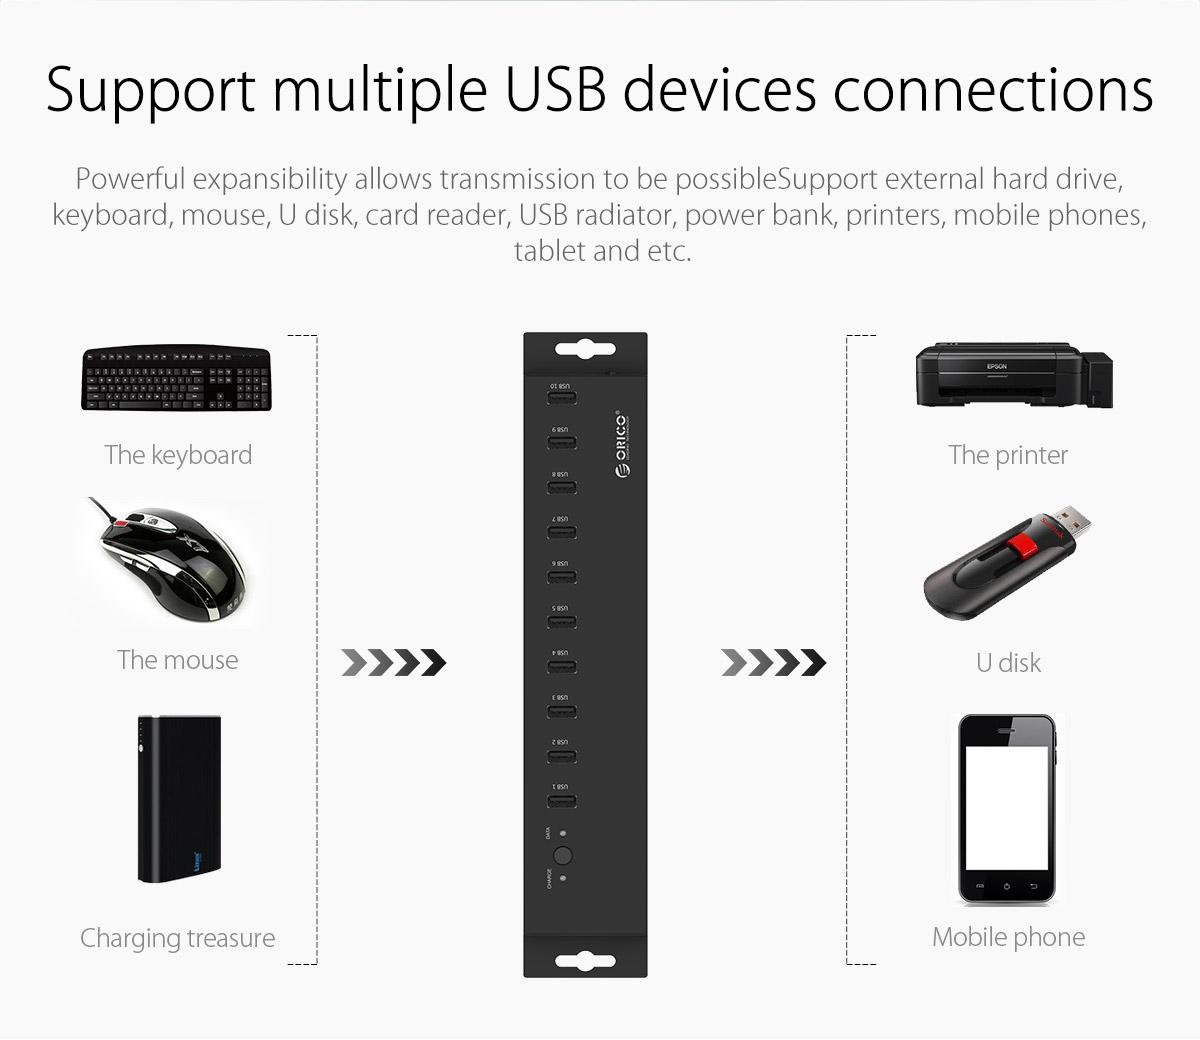 sipport multiple USB devices connections